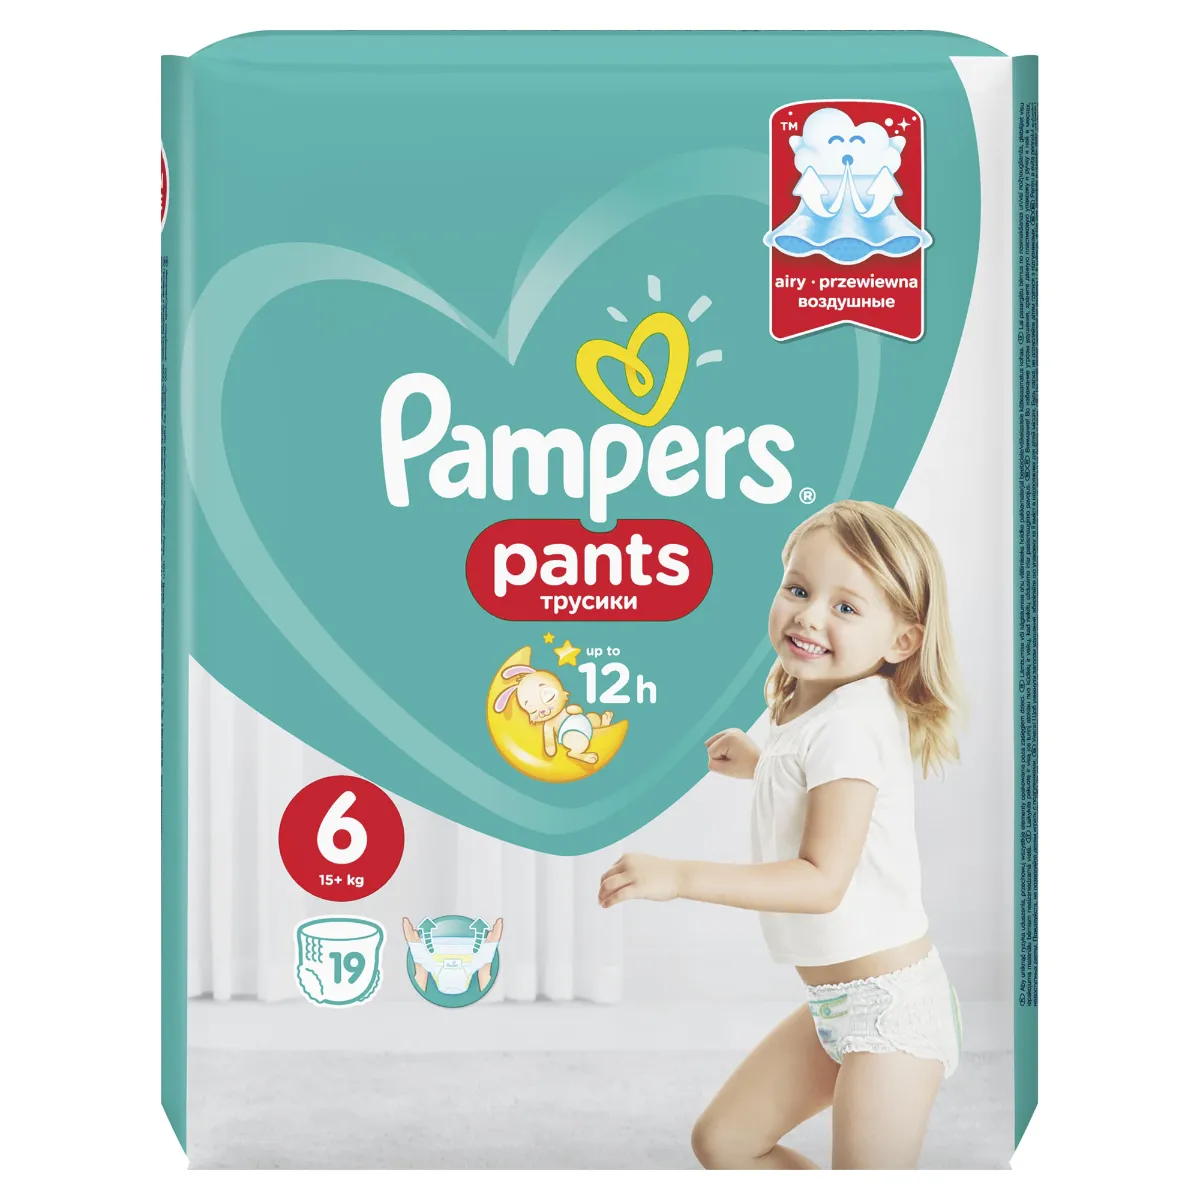 Scutece-chilotel Pants Carry Pack Extra large, Marimea 6, +15kg, 19 bucati, Pampers